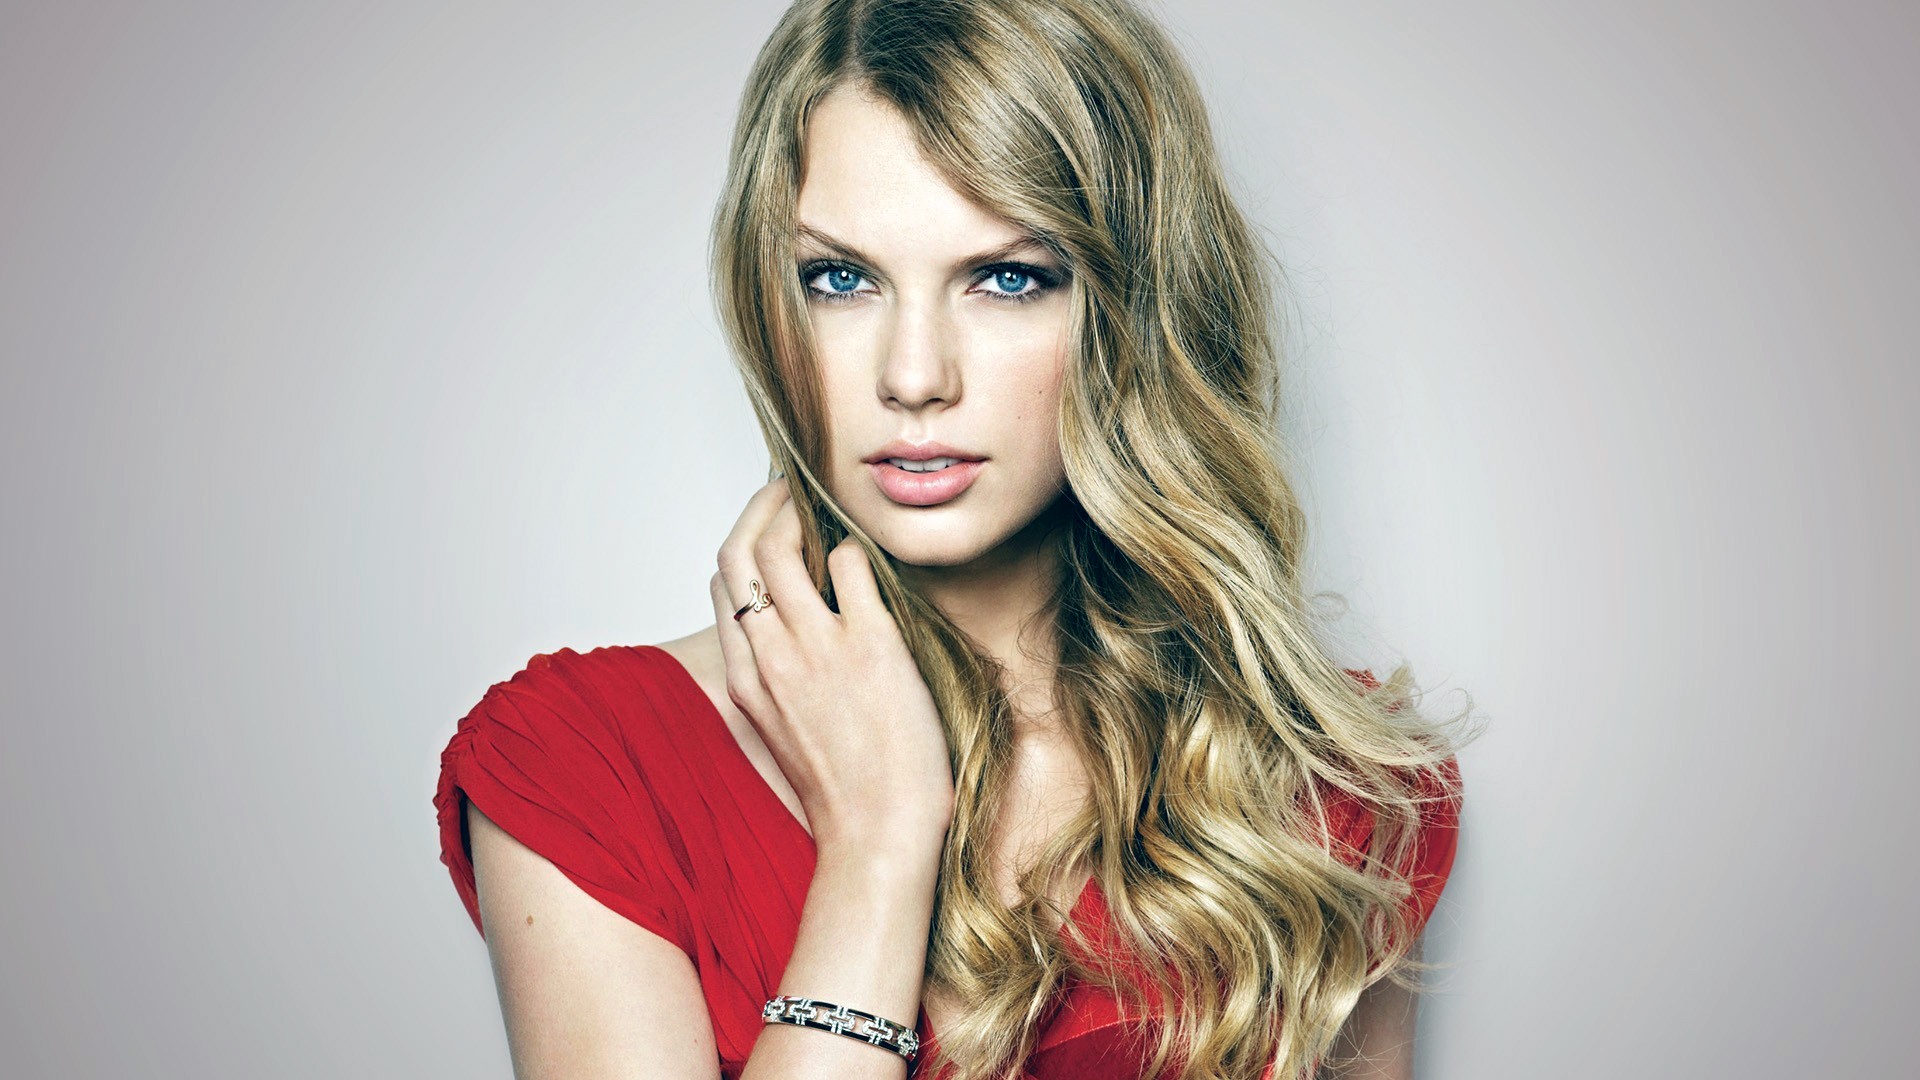 taylor swift wallpapers hd A10